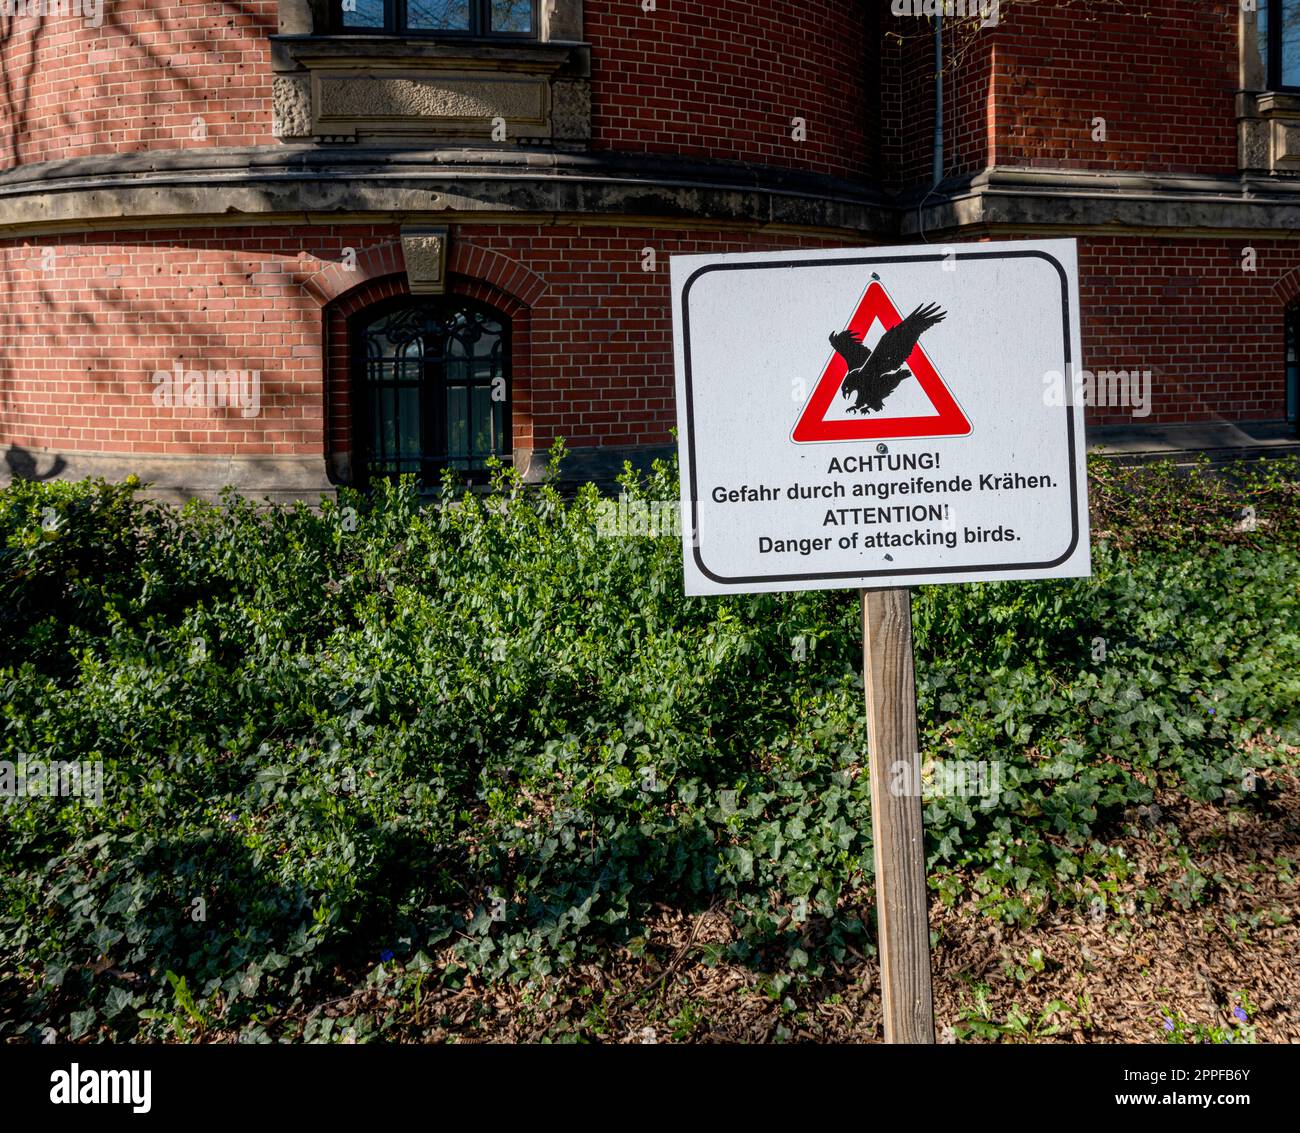 Sign In Front Of A Building, Danger From Attacking Crows, Berlin, Germany Stock Photo